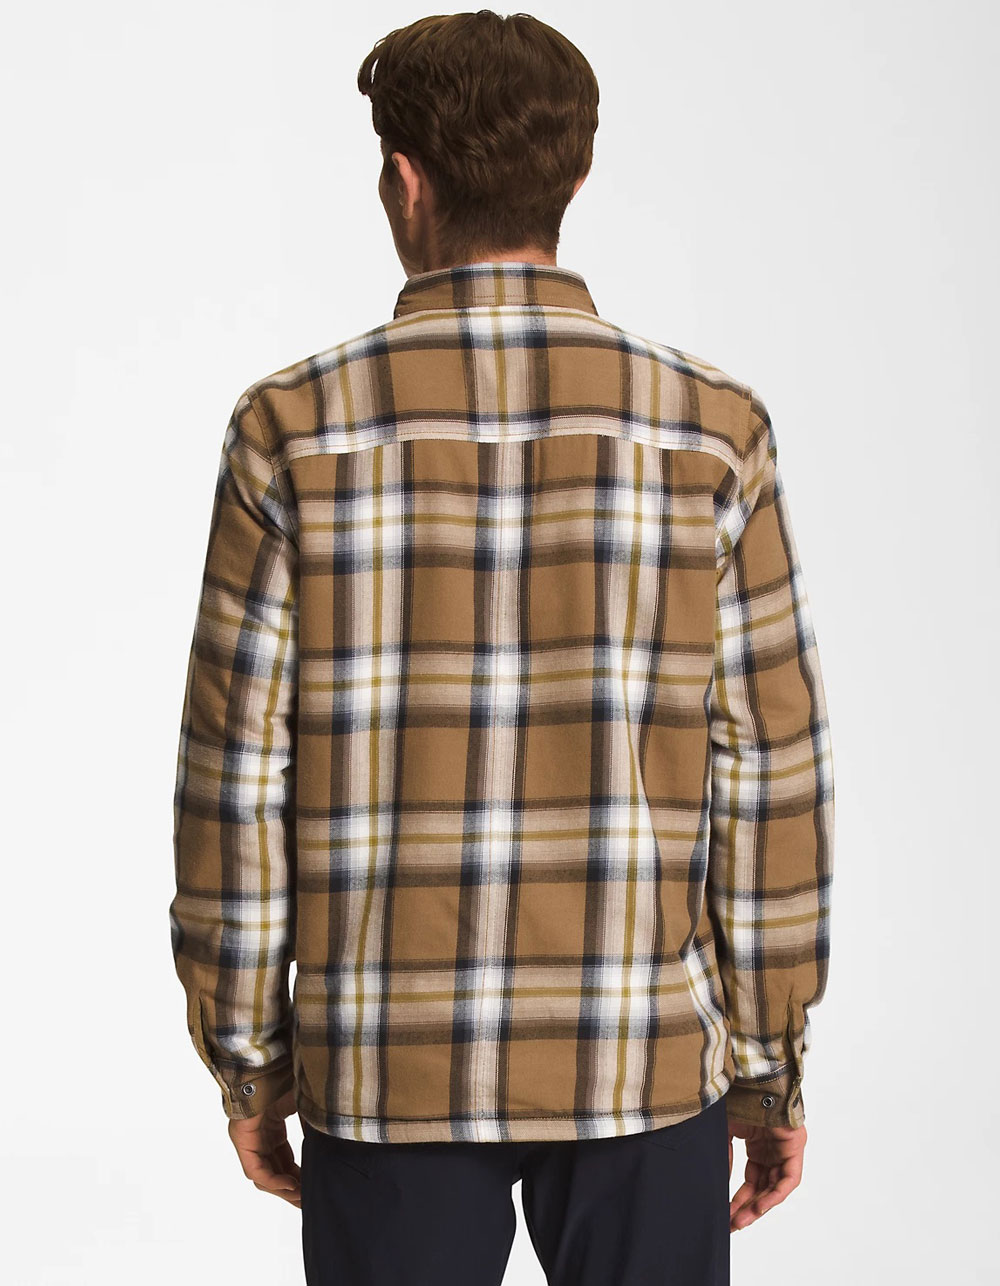 THE NORTH FACE Campshire Mens Shirt Jacket - BROWN COMBO | Tillys